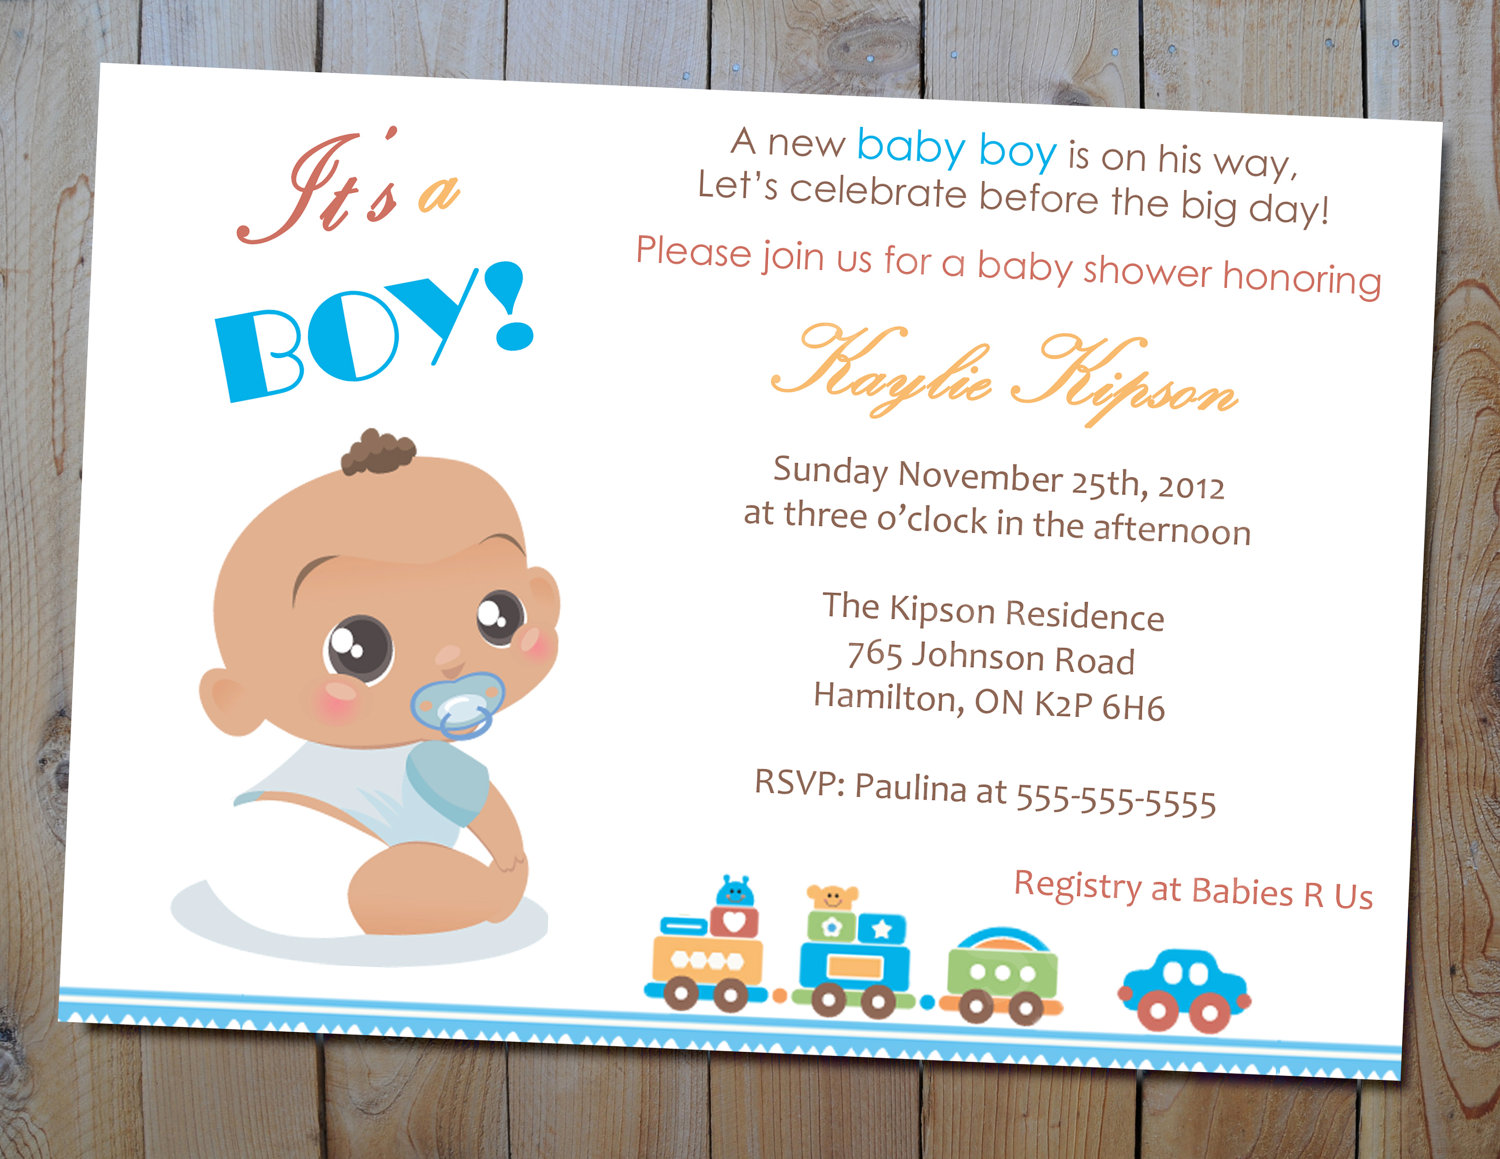 Full Size of Baby Shower:63+ Delightful Cheap Baby Shower Invitations Image Inspirations Cheap Baby Shower Invitations Baby Shower Party Themes Ideas Para Baby Shower Baby Shower Venues Nyc Baby Shower Gift Baskets Baby Shower Registry Baby Shower Wreath Make Cheap Baby Shower Invitations Ideas Invitations Card